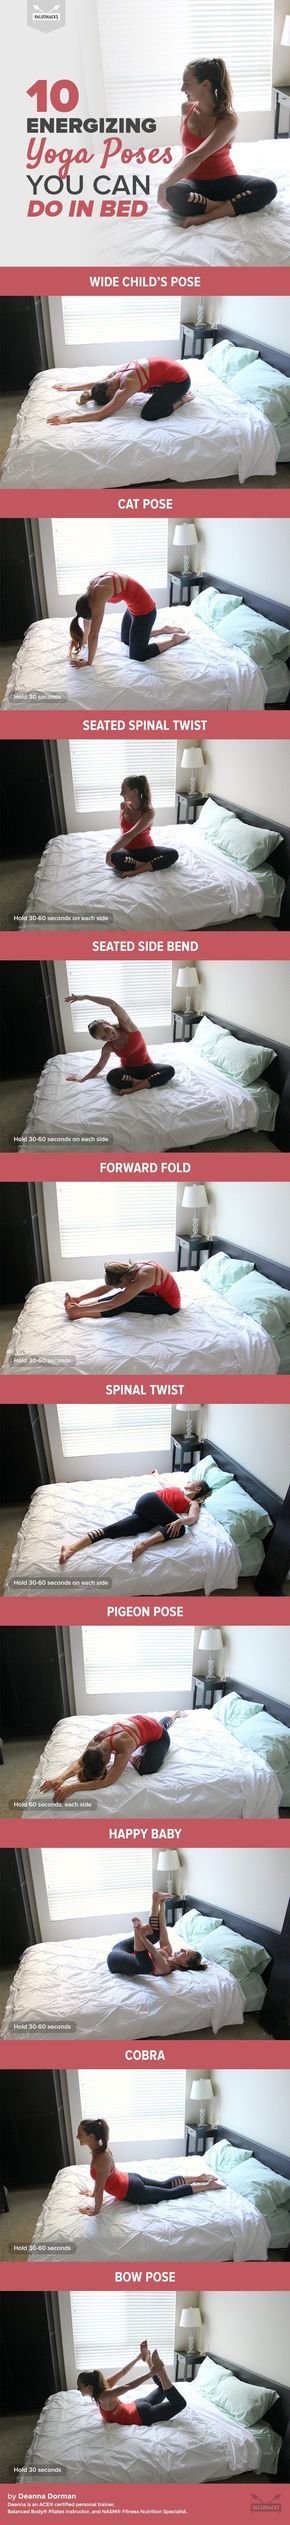 10 Energizing Yoga Poses You Can Do in Bed